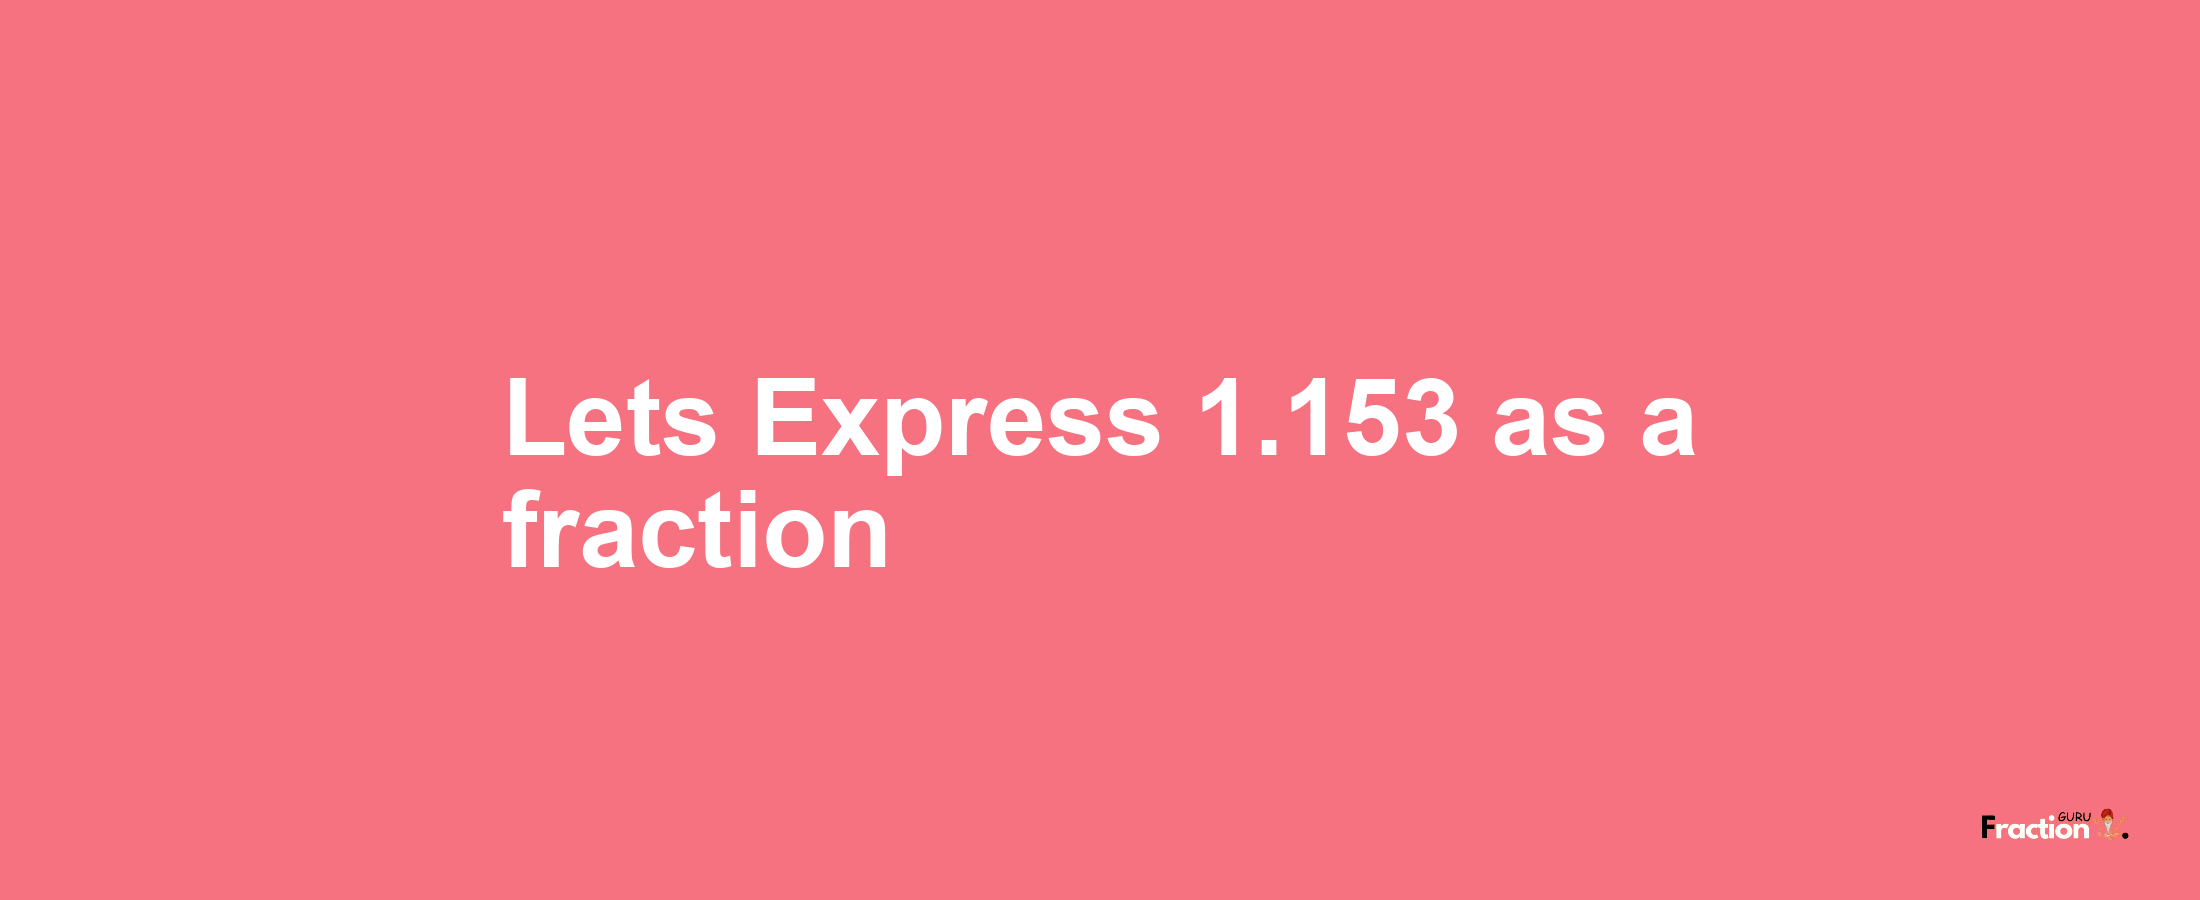 Lets Express 1.153 as afraction